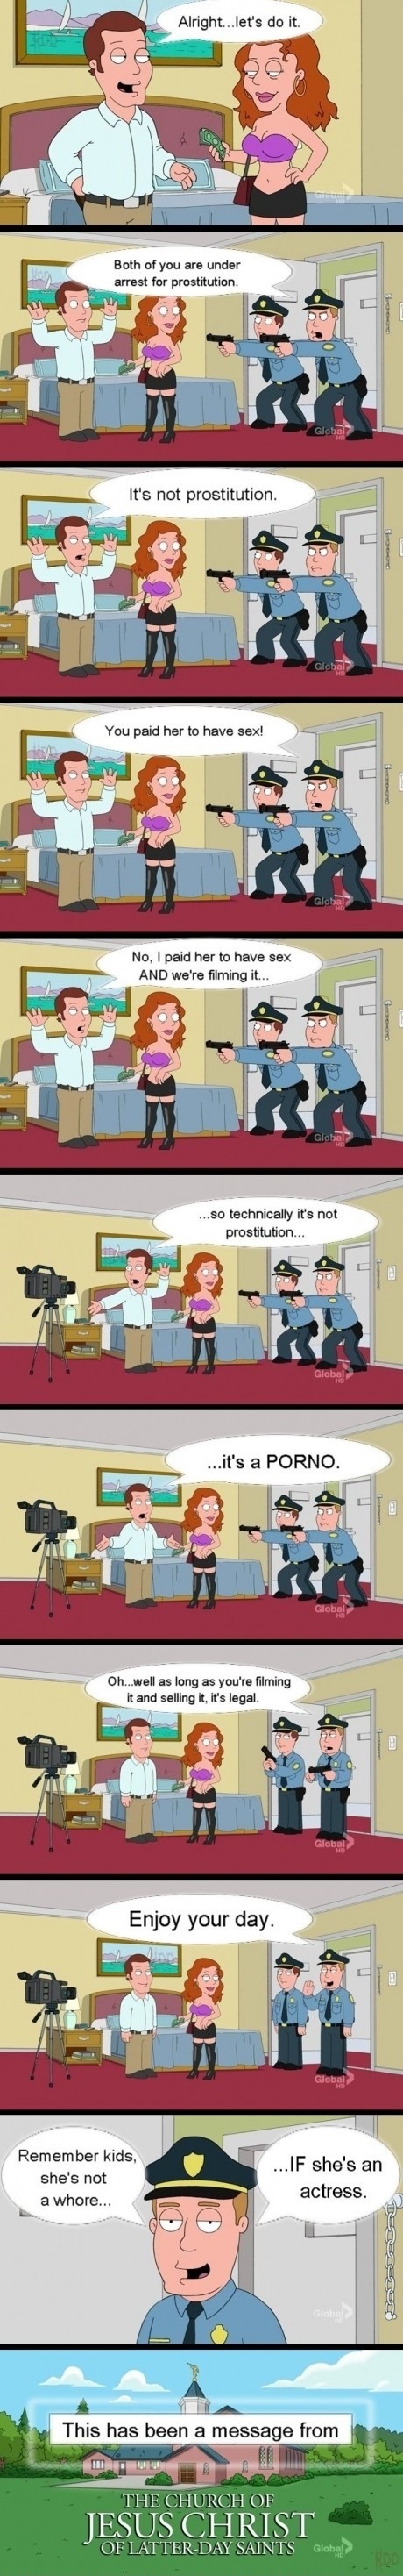 prostitution, porn, legal, double standards, family guy